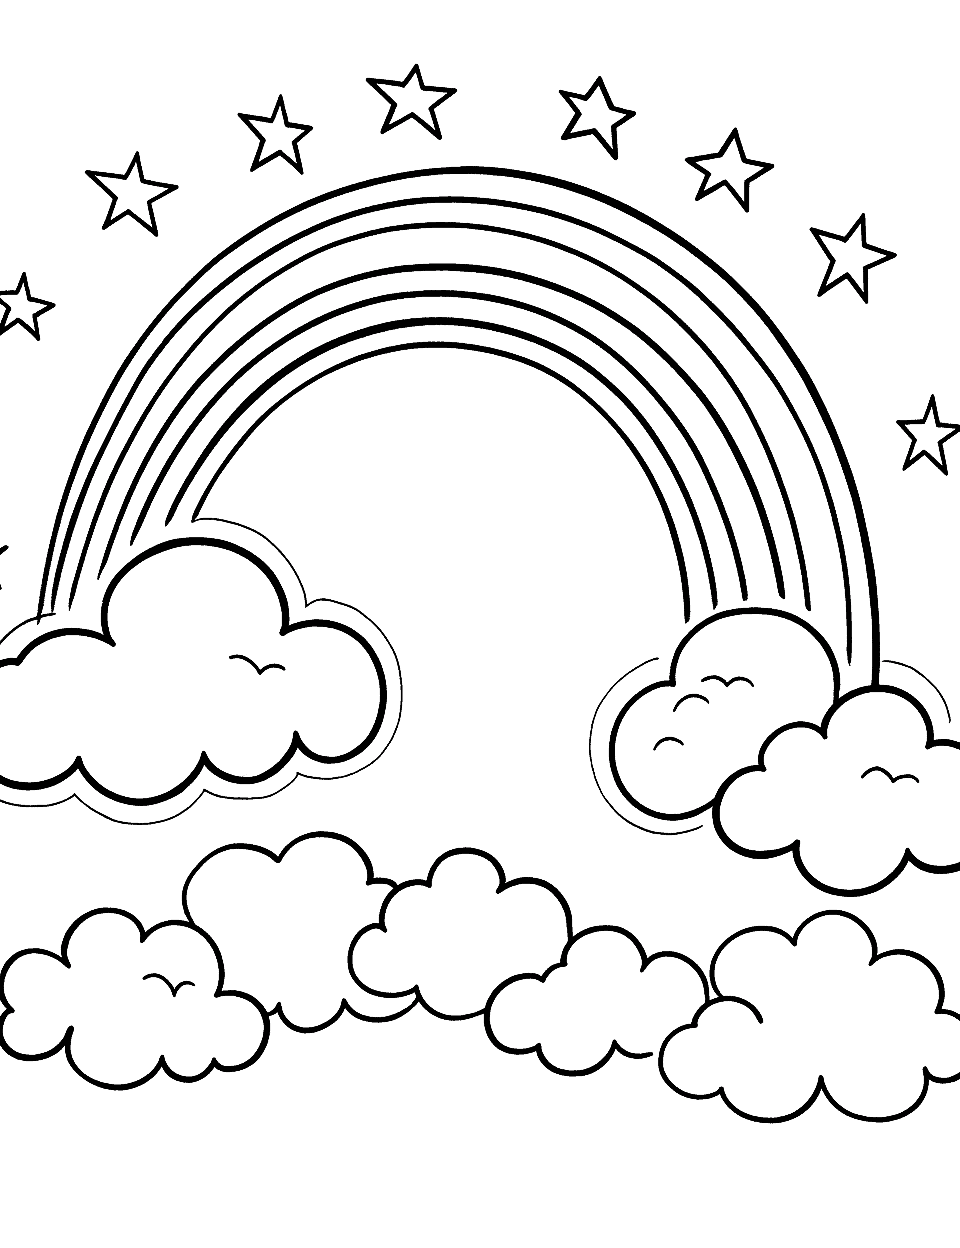 Magical Rainbow Cute Coloring Page - A sparkling rainbow stretching across the sky with fluffy clouds.